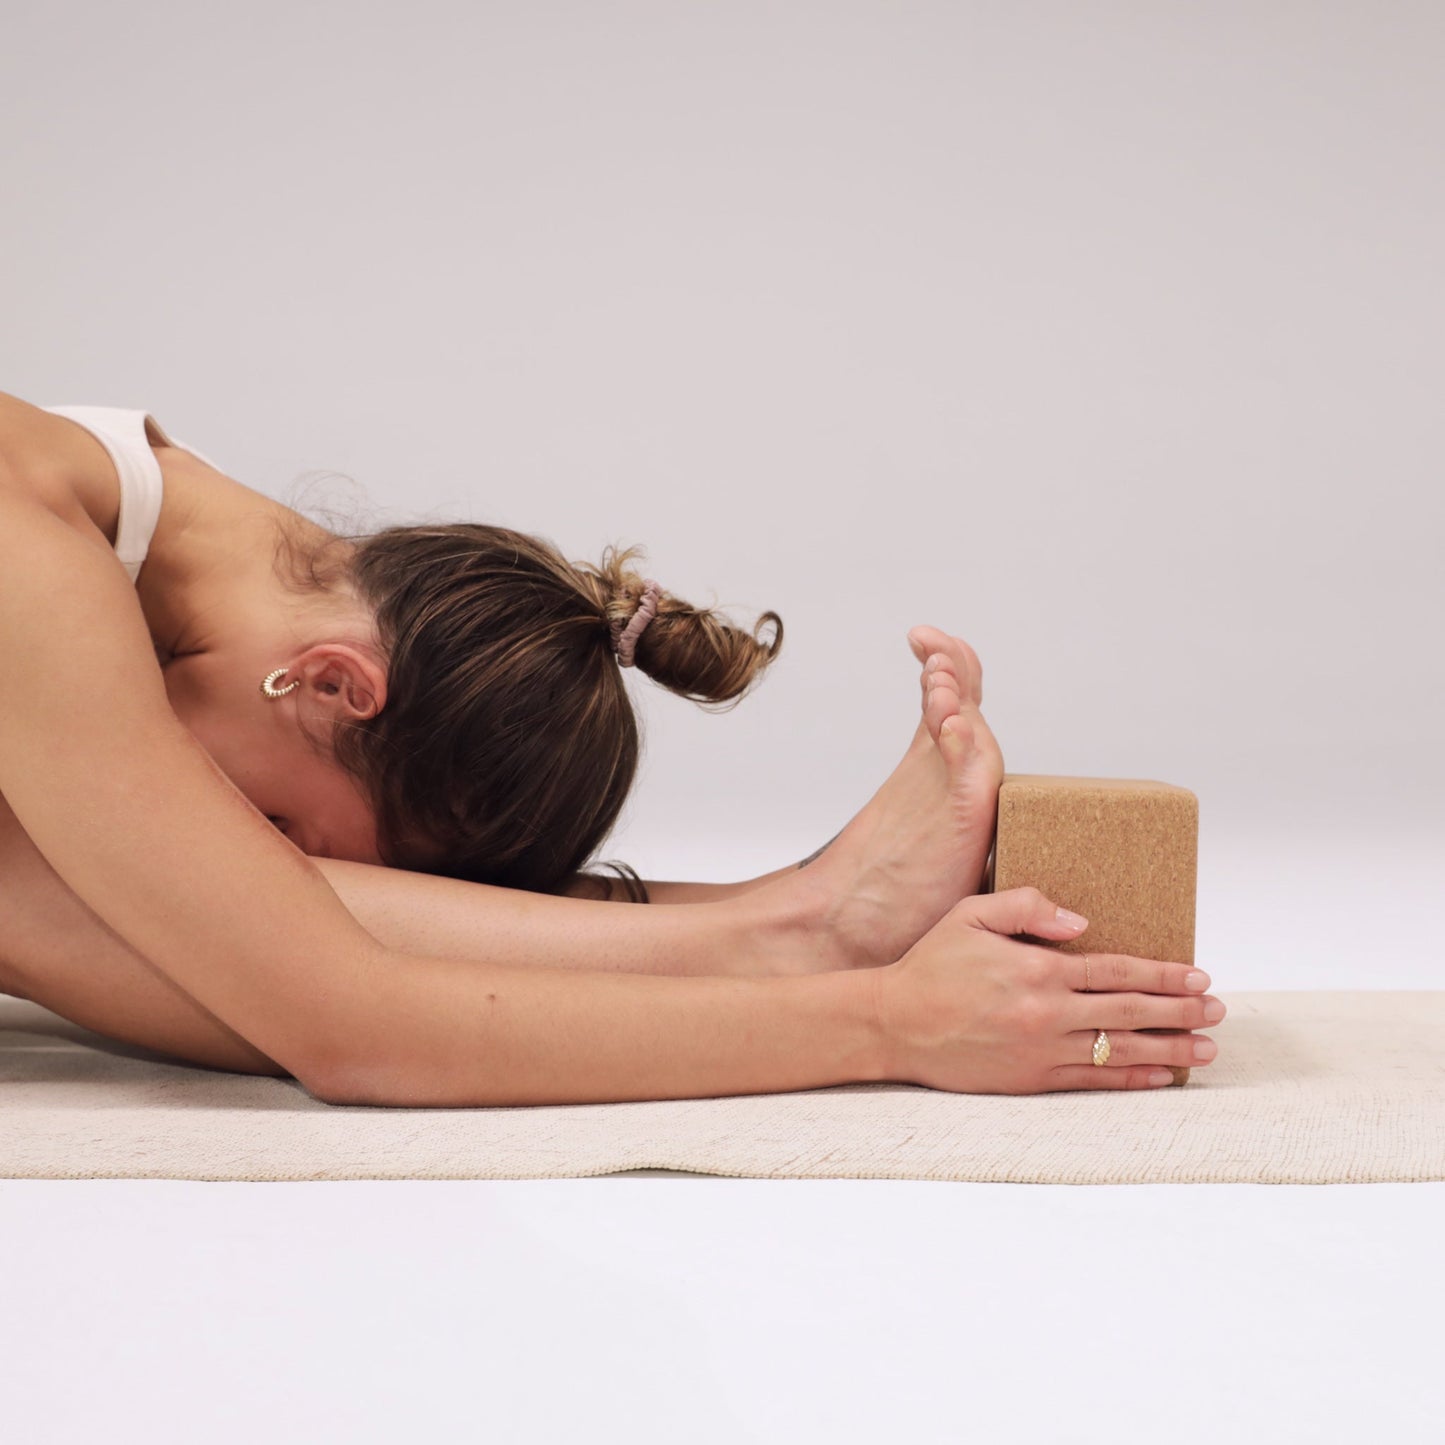 Cork Yoga Block Set by Ananday